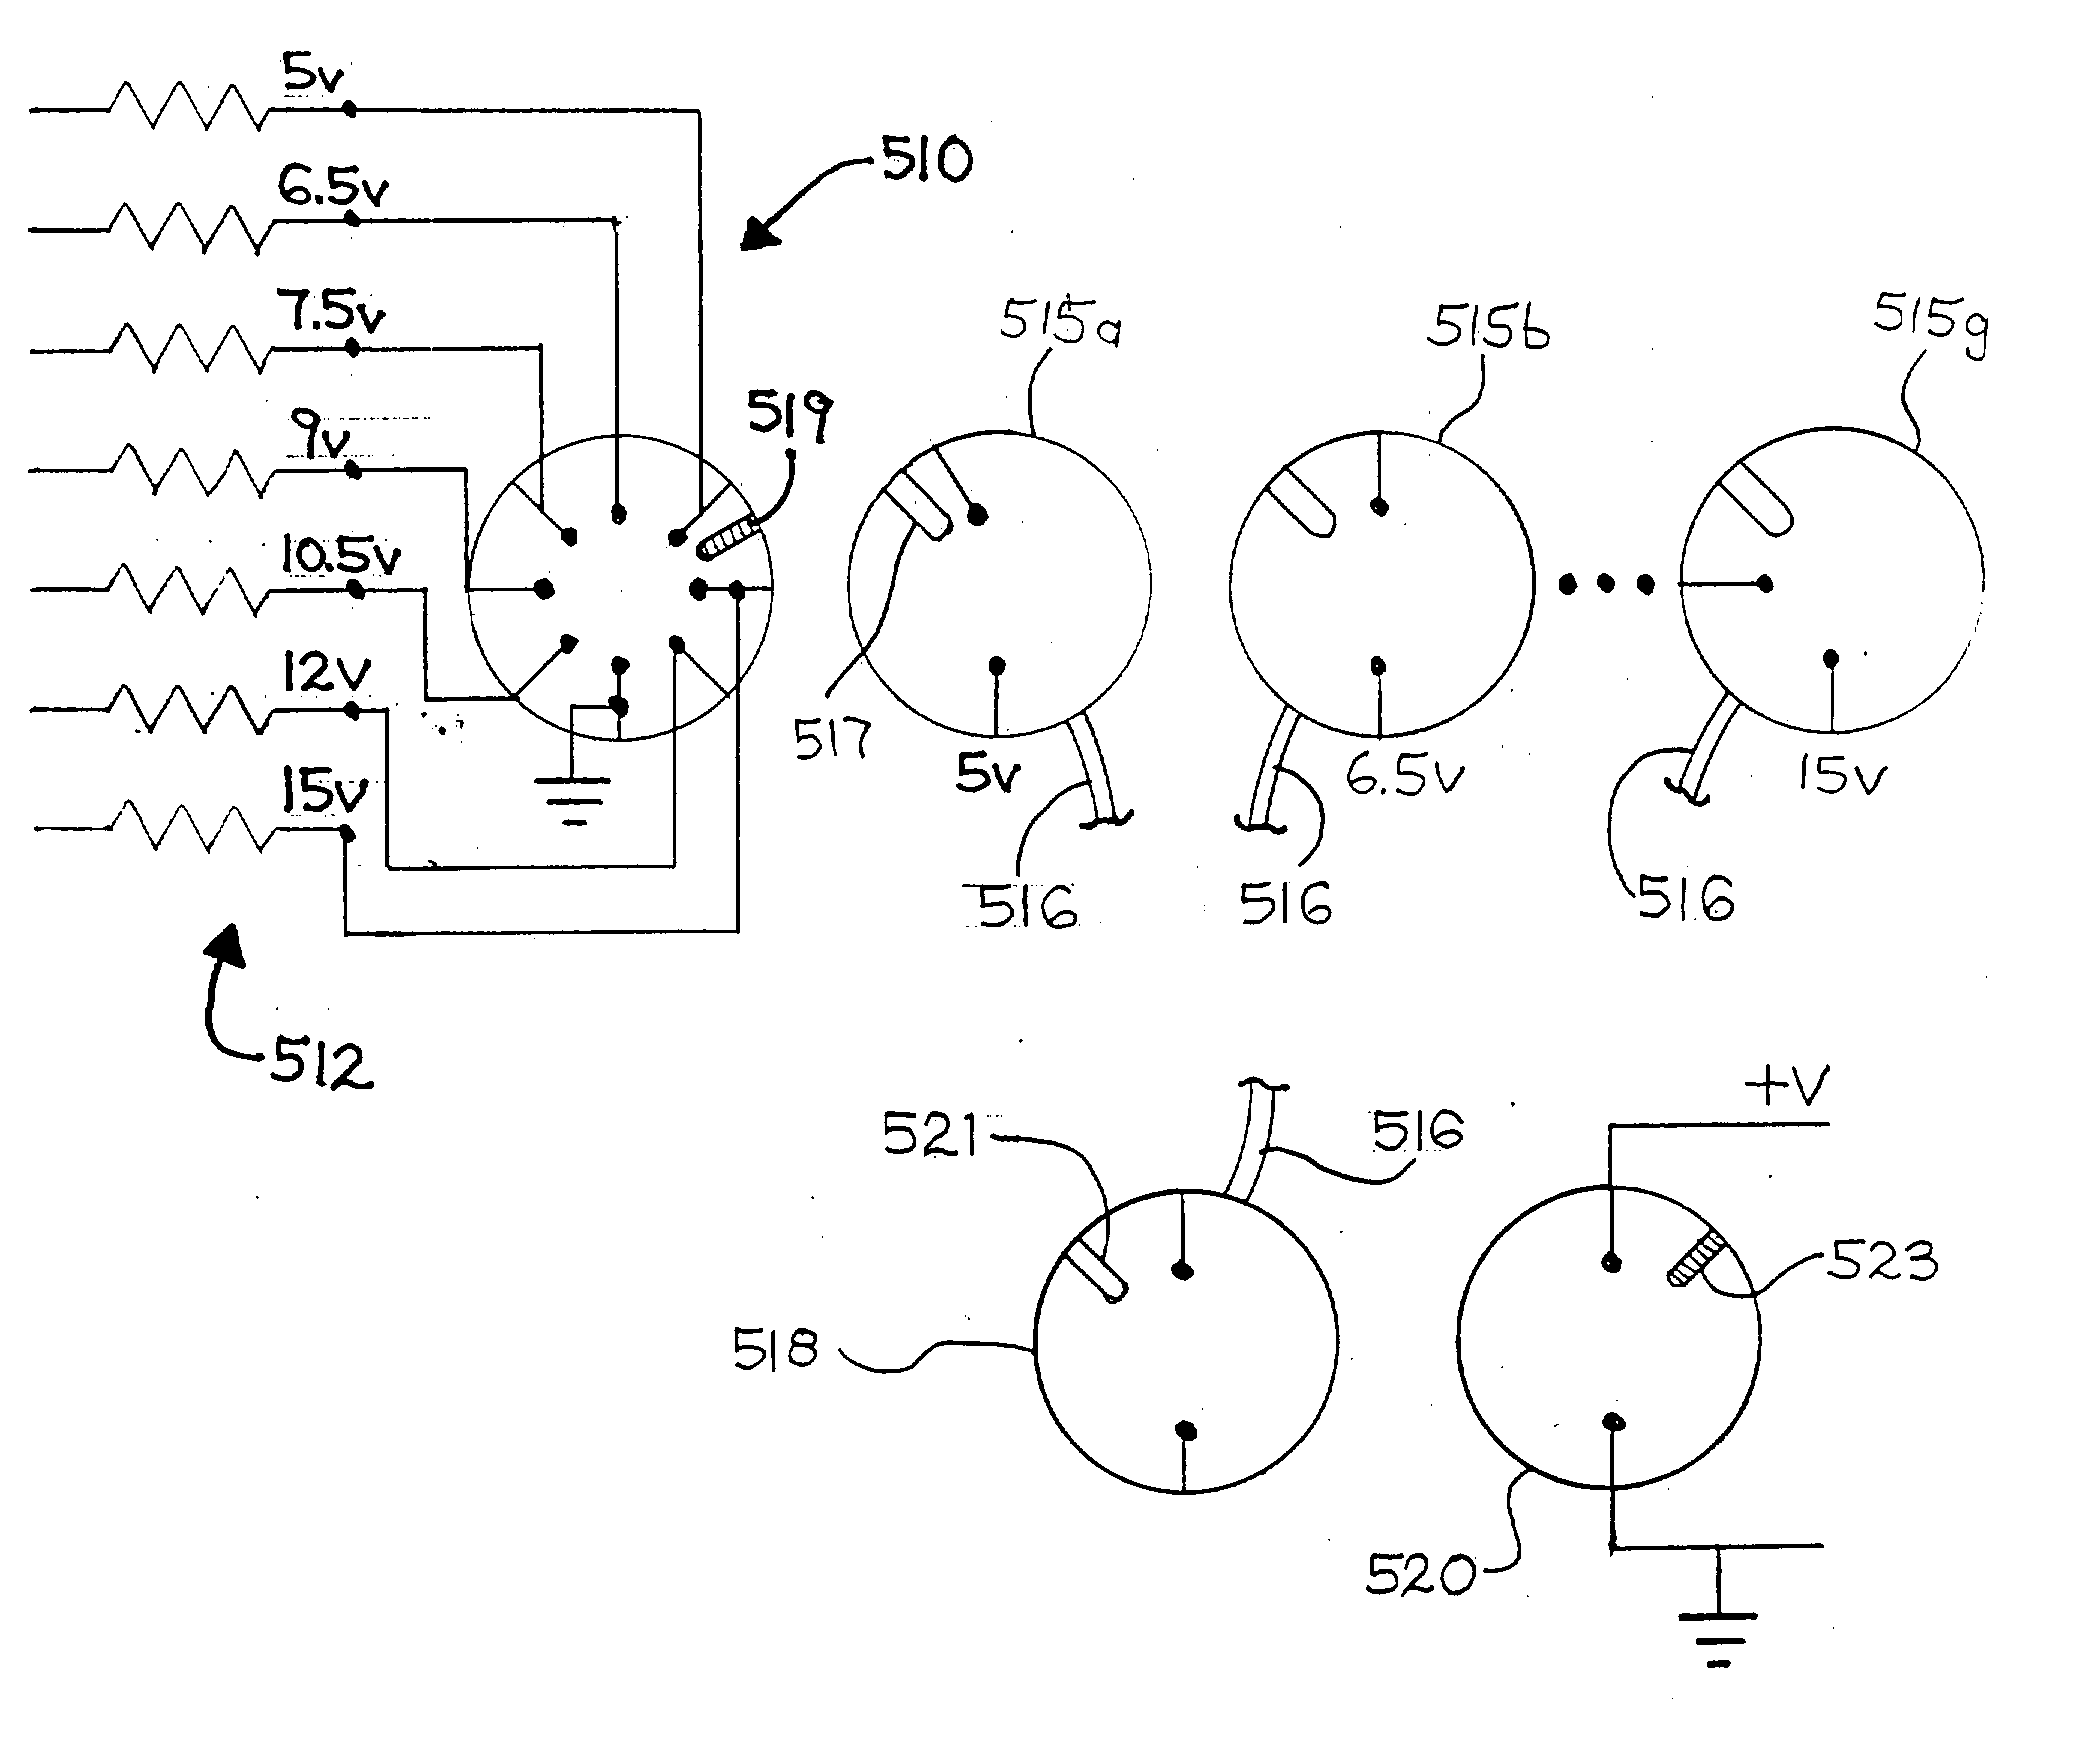 Automatic voltage selection in a DC power distribution apparatus